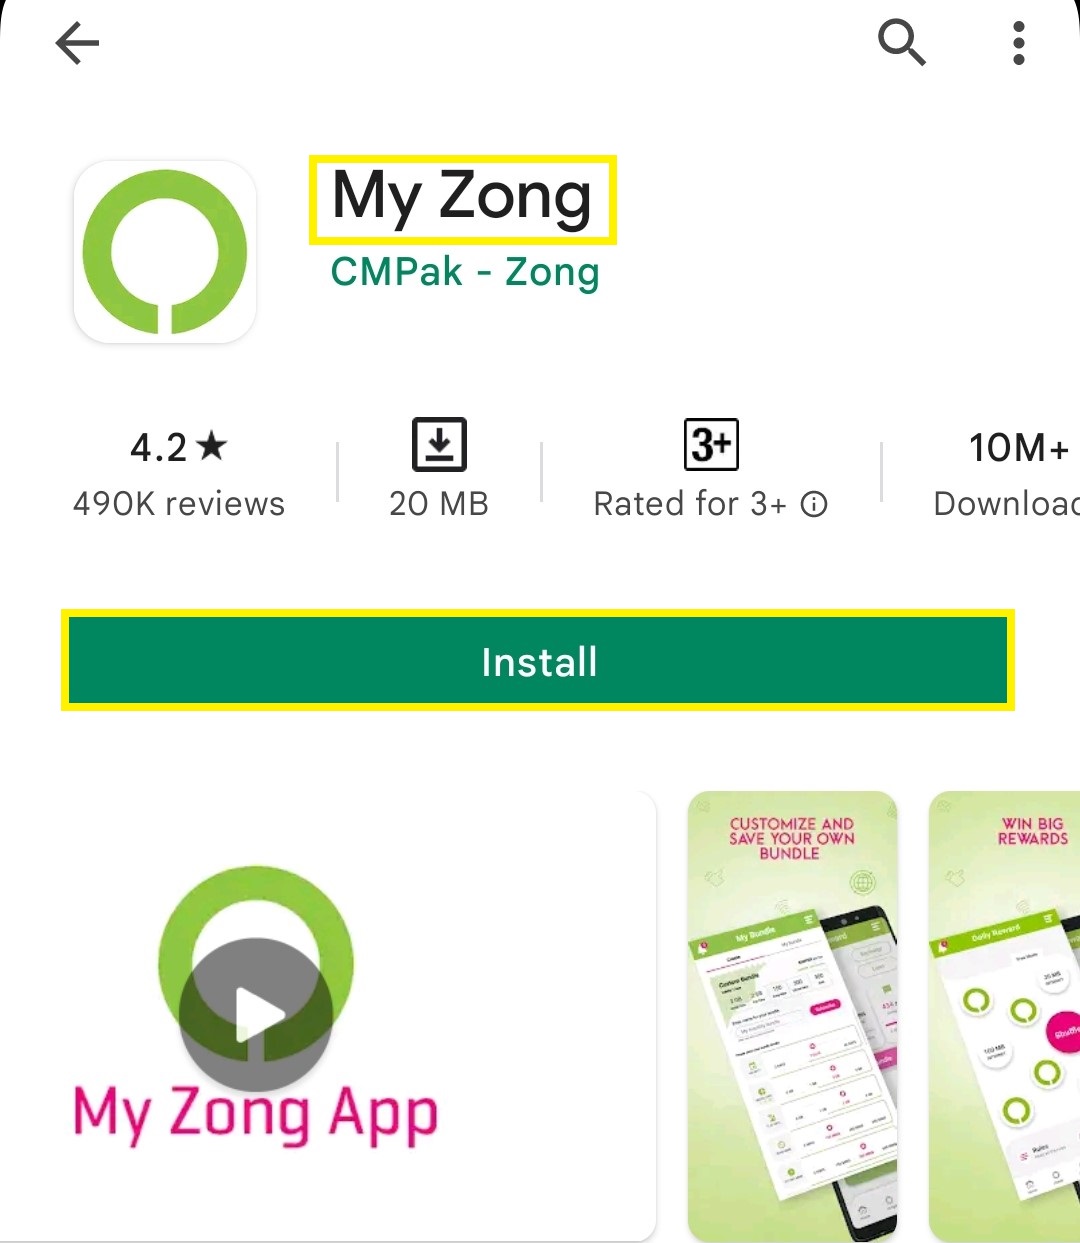 Checking Zong Balance by “My Zong App”